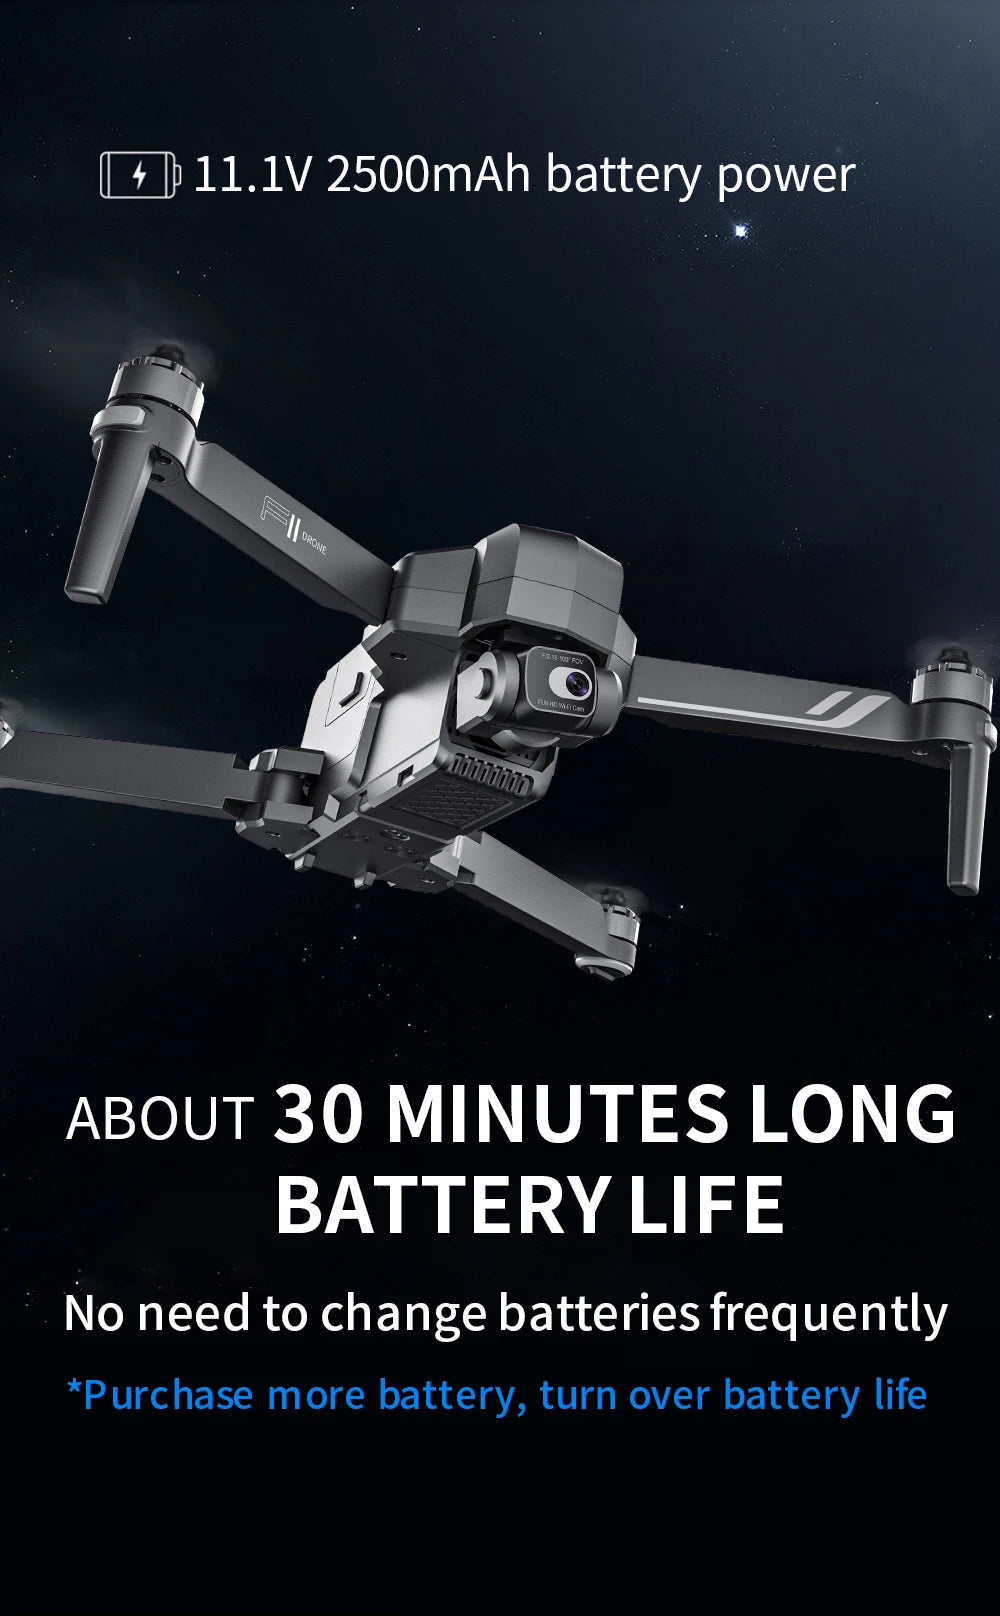 F11S PRO Drone, 11.1V 2500mAh battery power ABOUT 30 MINUTES LONG B